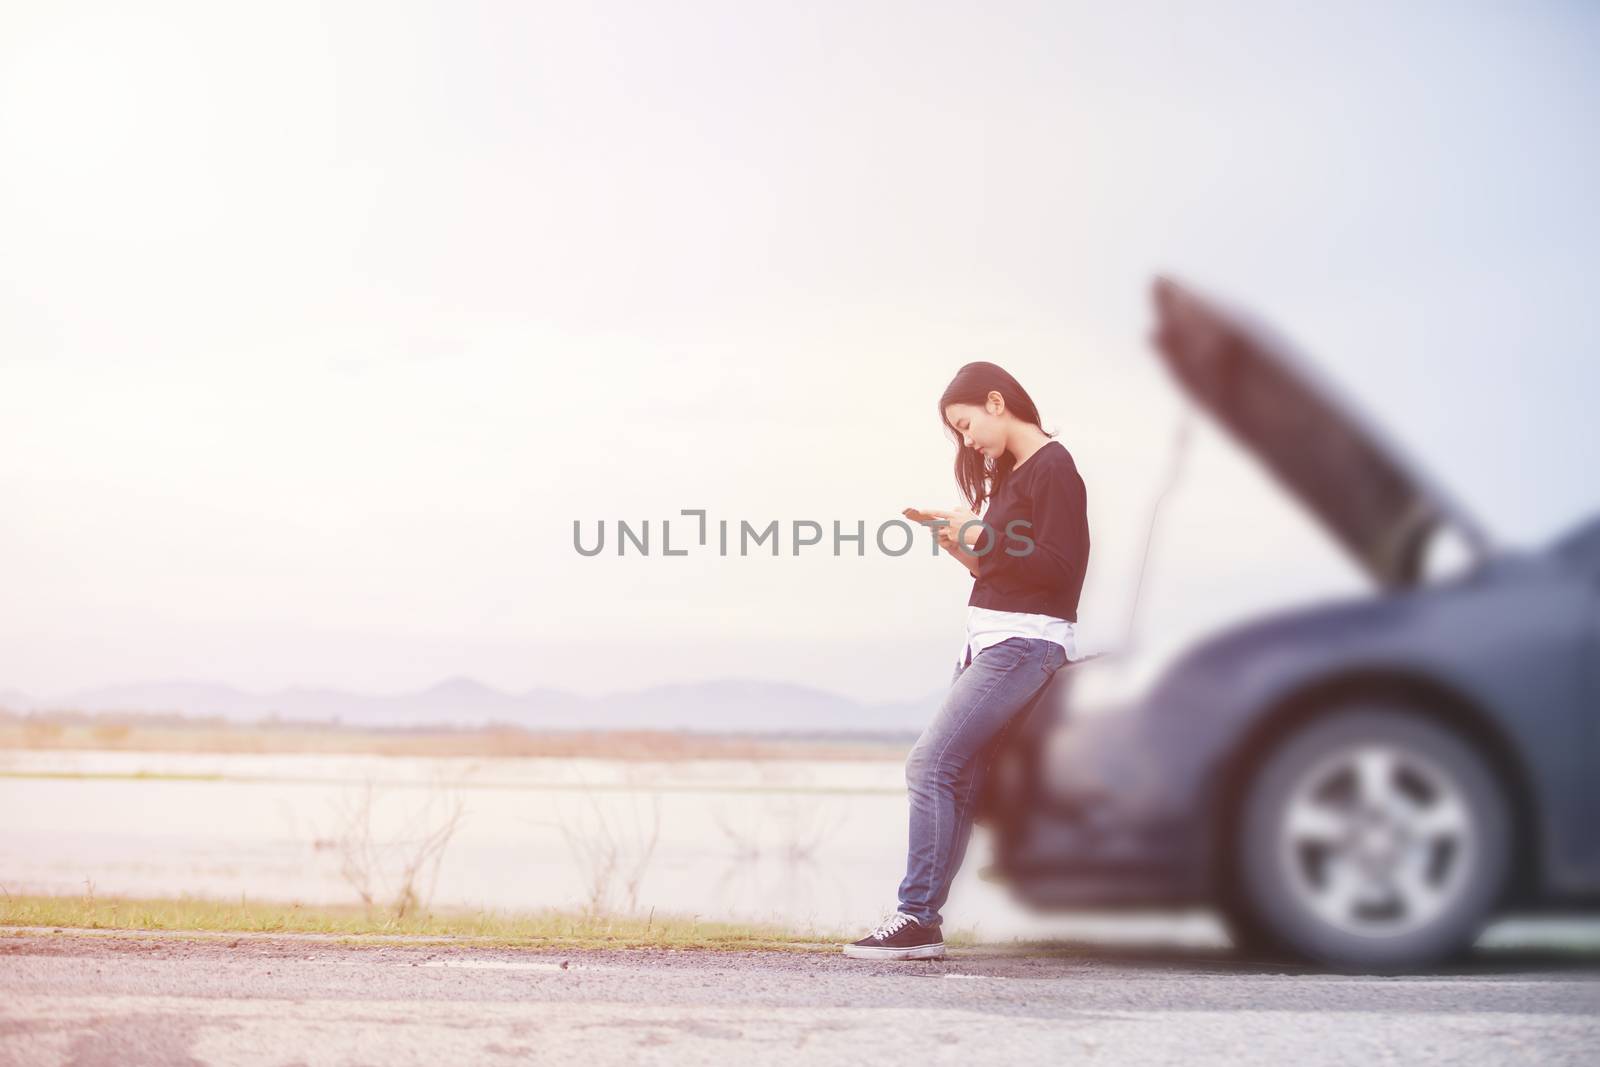 Asian woman is using a telephone to call the car mechanic. For f by Tuiphotoengineer